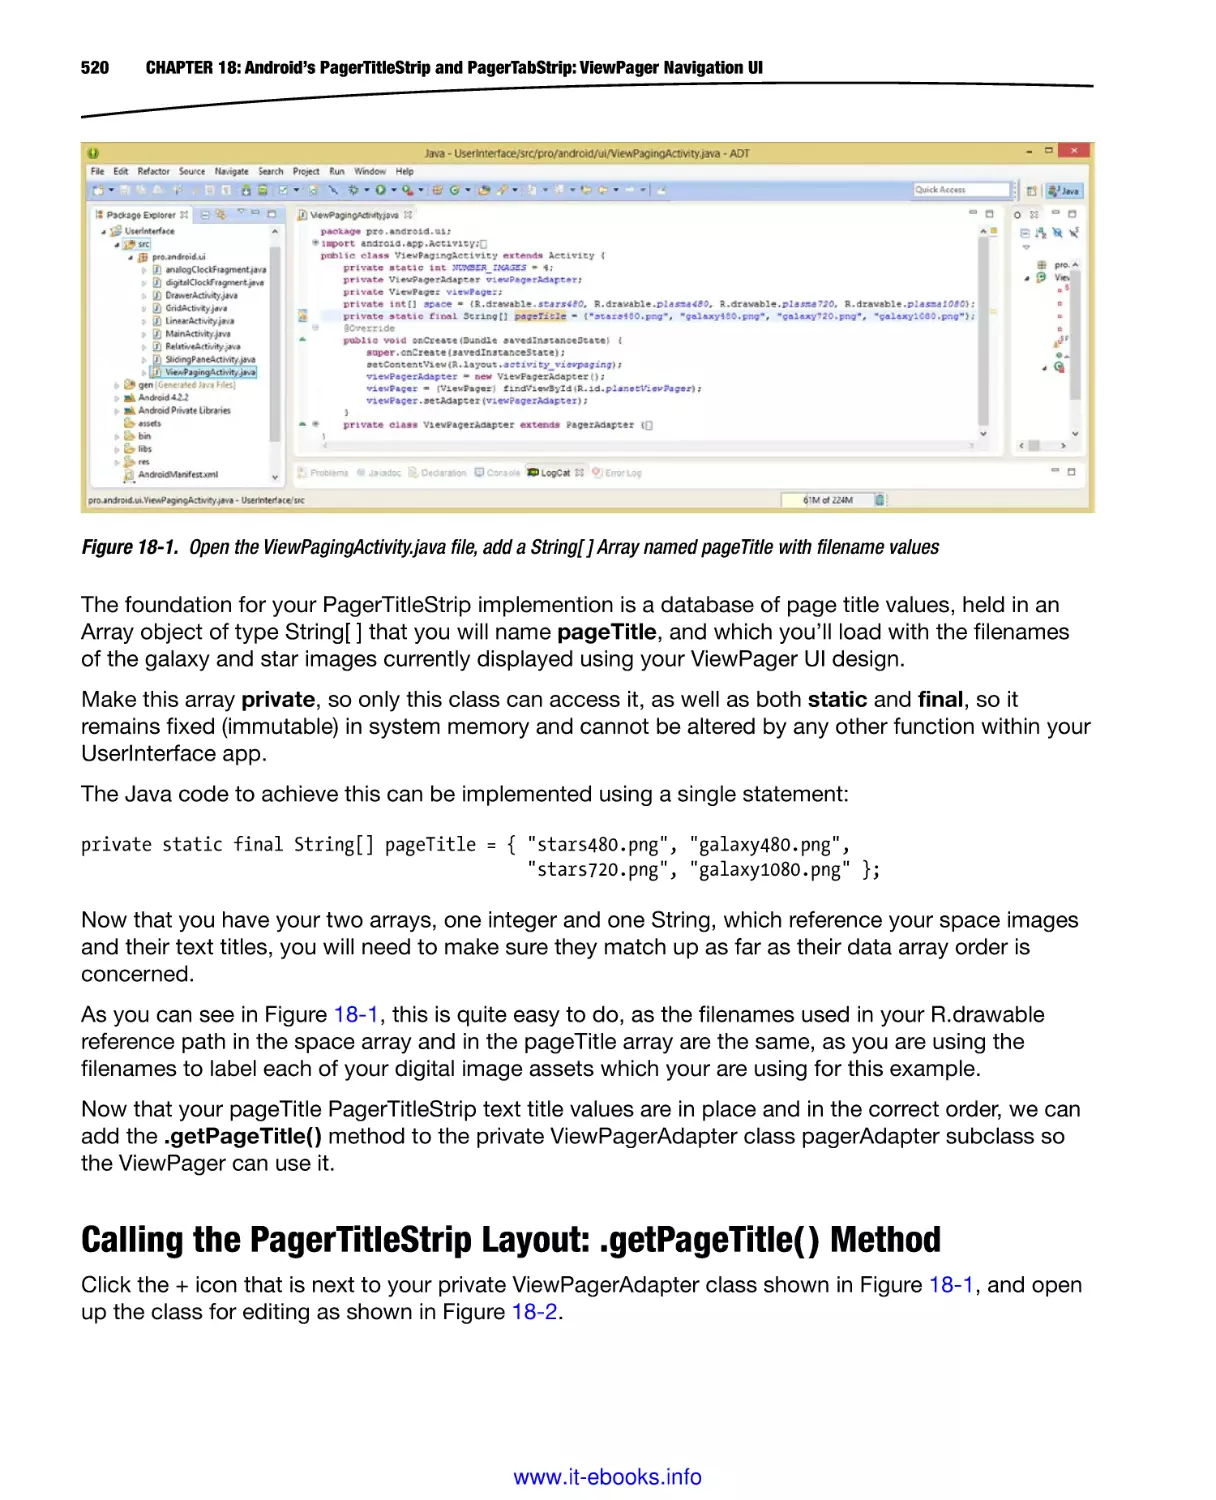 Calling the PagerTitleStrip Layout